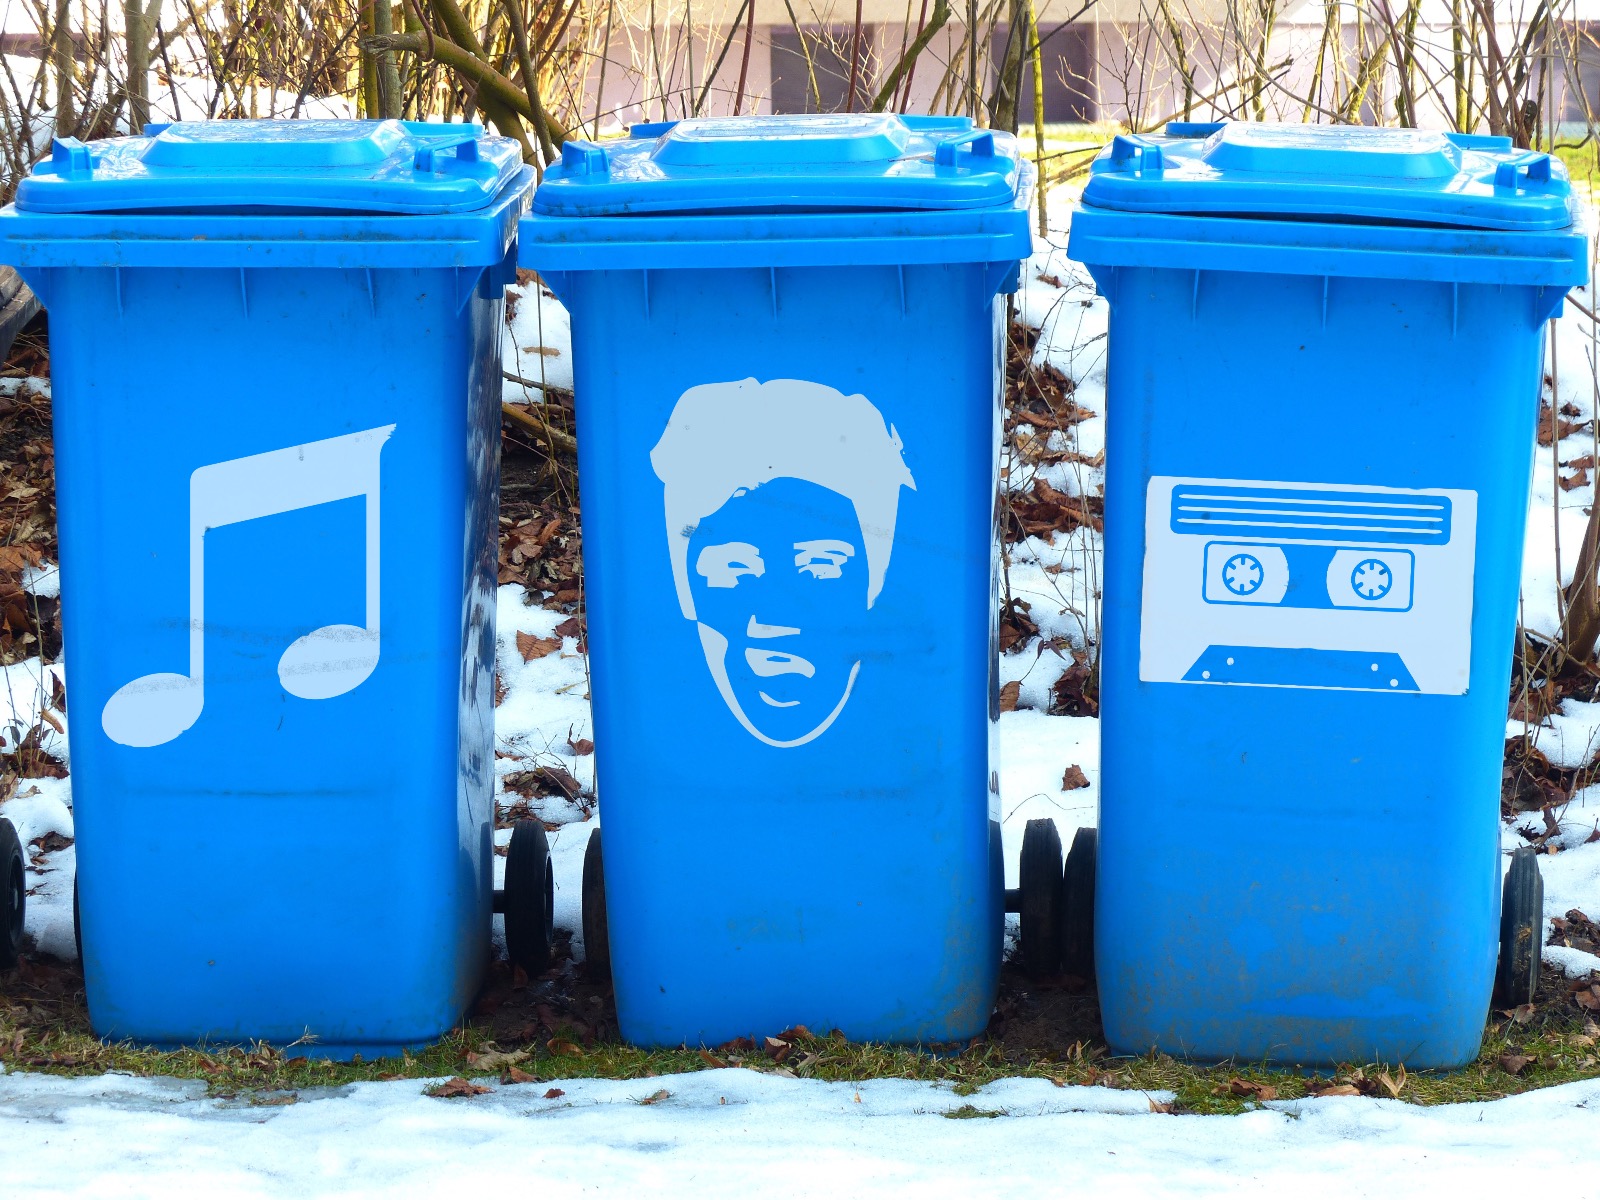 Giant blue bins on a roadside that have decals of music notes, Elvis' face and a cassette tape